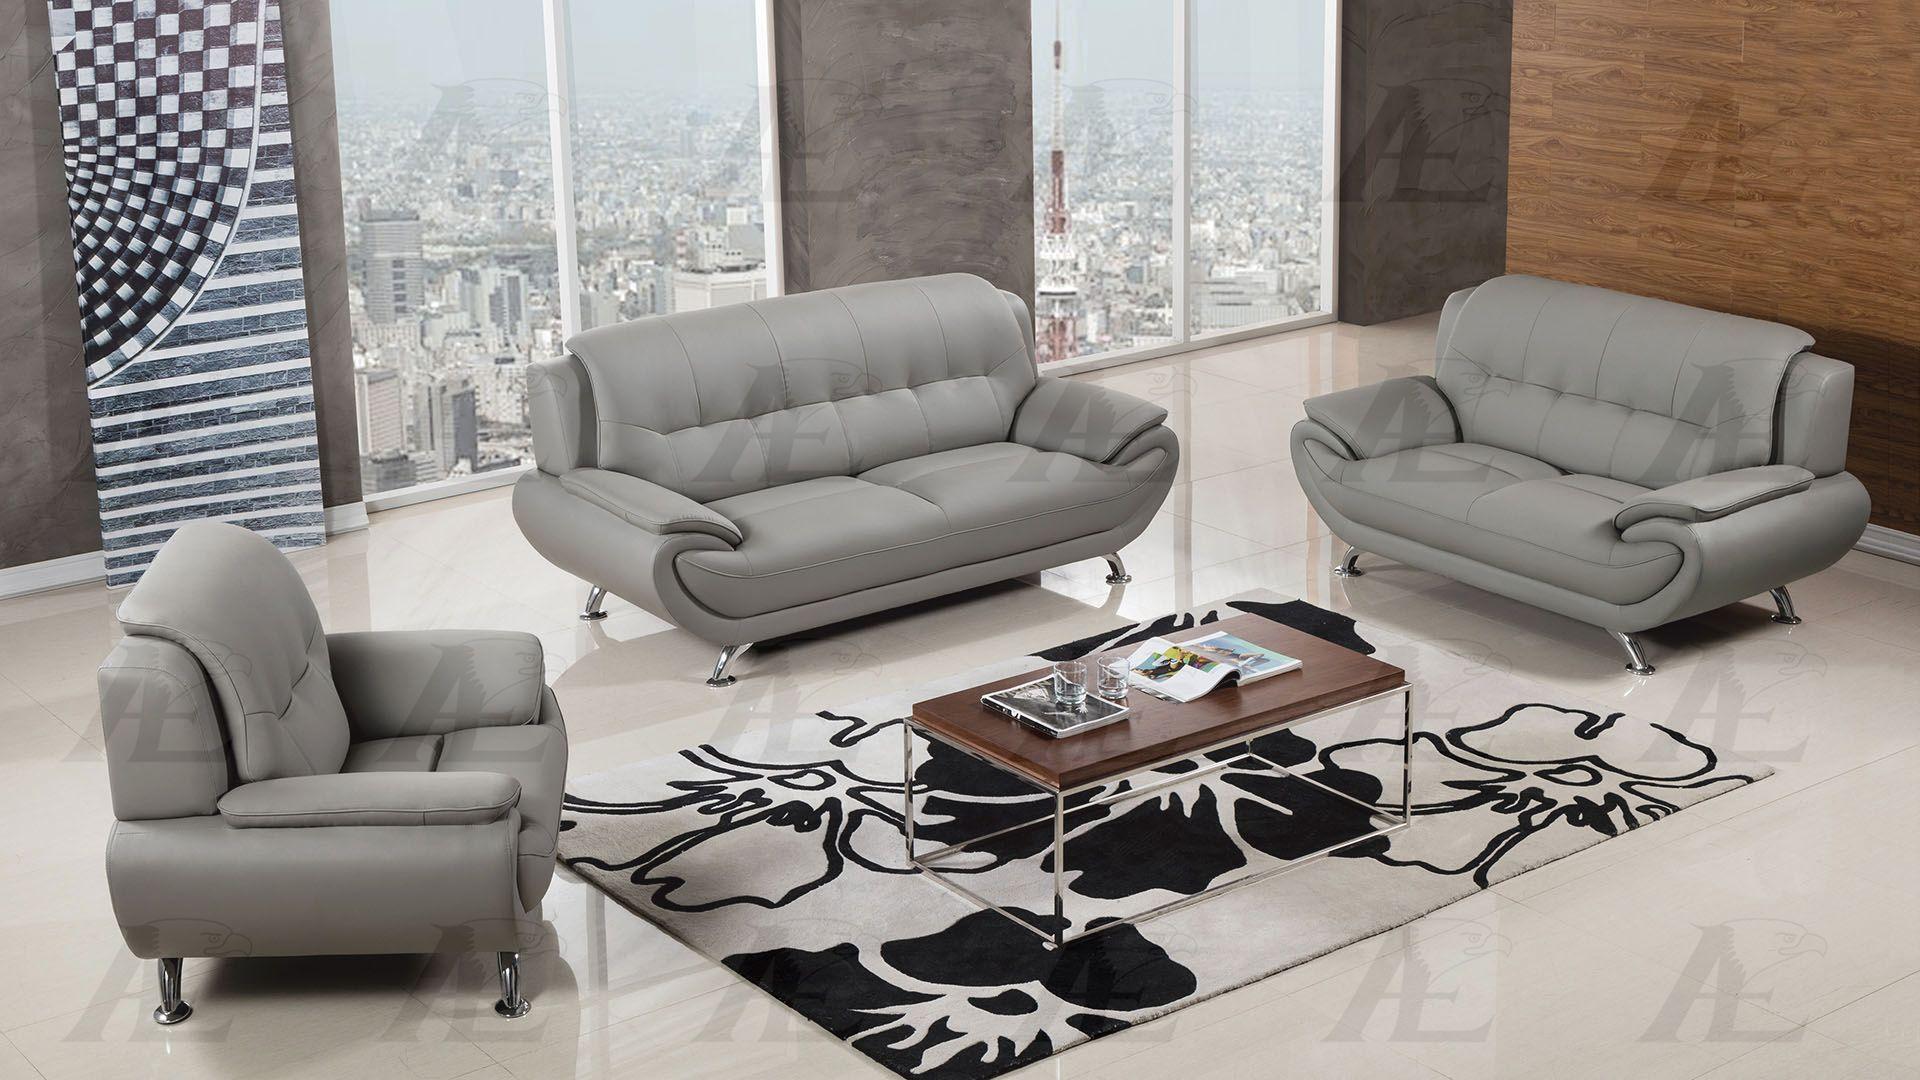 

    
American Eagle AE208 Gray Bonded Leather Living Room Sofa Set 3pcs in Modern Style
